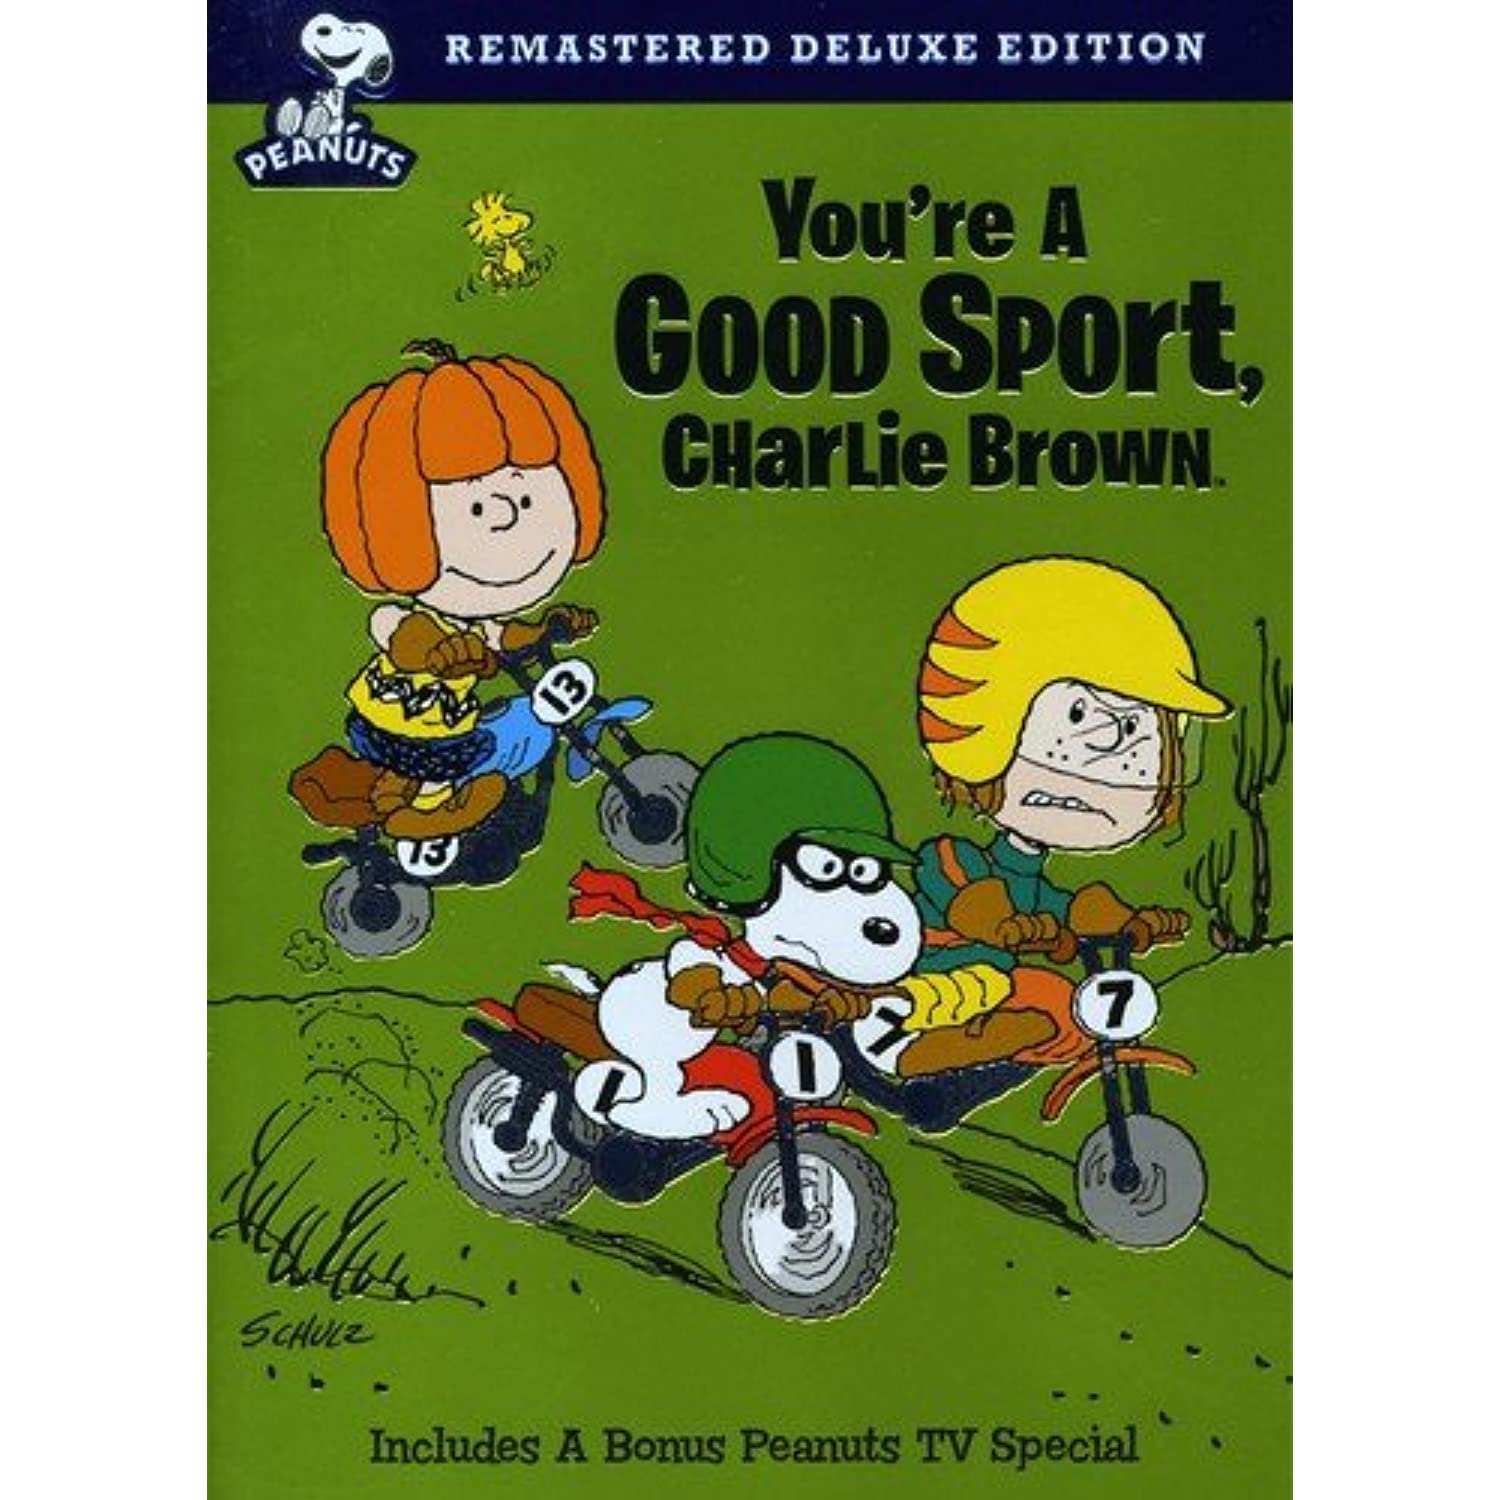 You're A Good Sport, Charlie Brown DVD